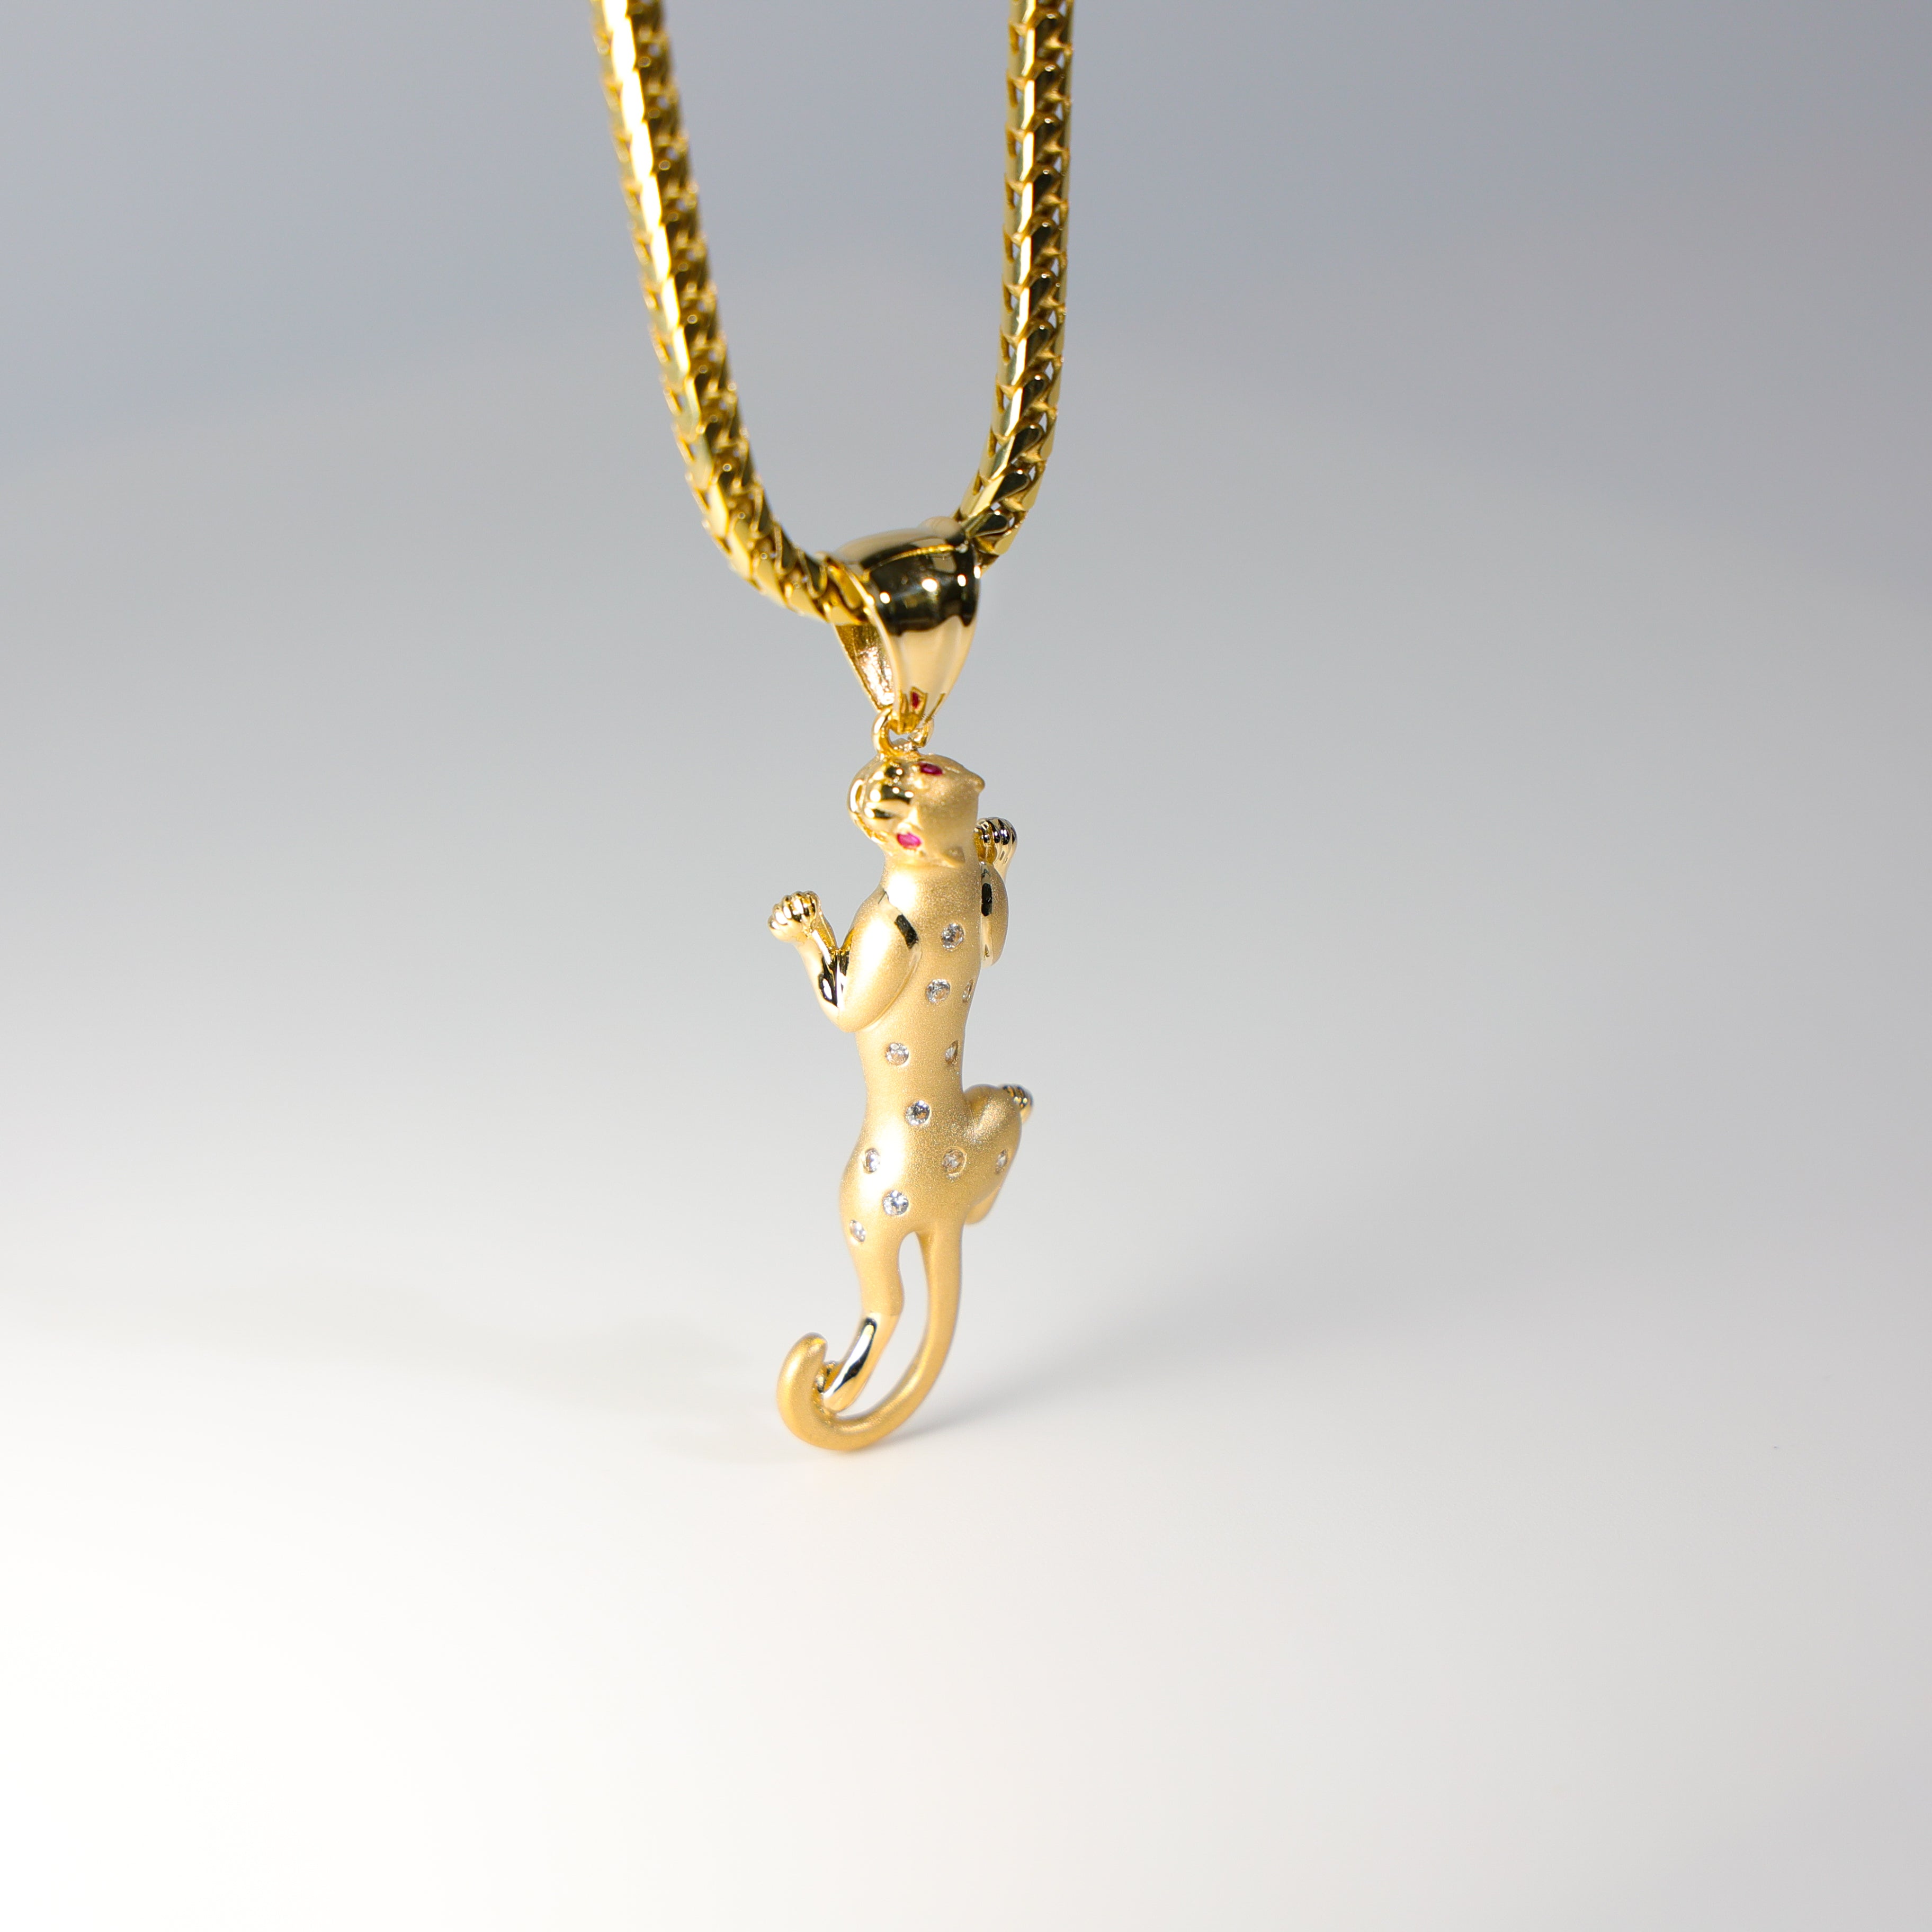 Charlie and Co Jewelry | Gold Panther Pendant | 14K Gold Animal Pendant Pendant + 22” Rope Chain 2.5mm